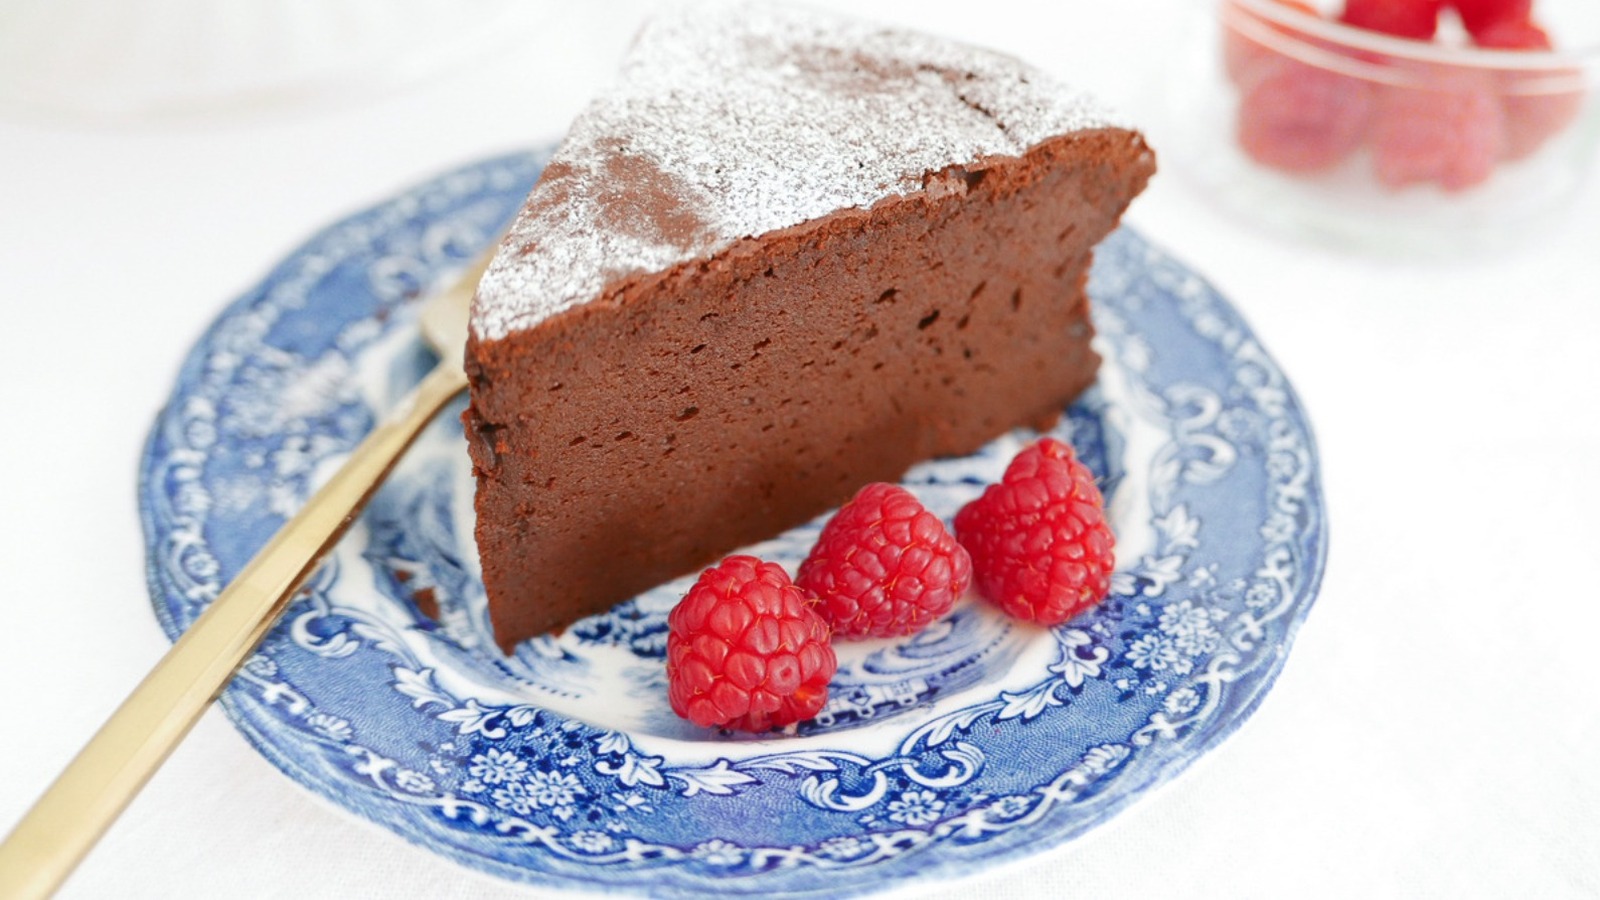 A showstopping chocolate cake recipe | Food | The Guardian